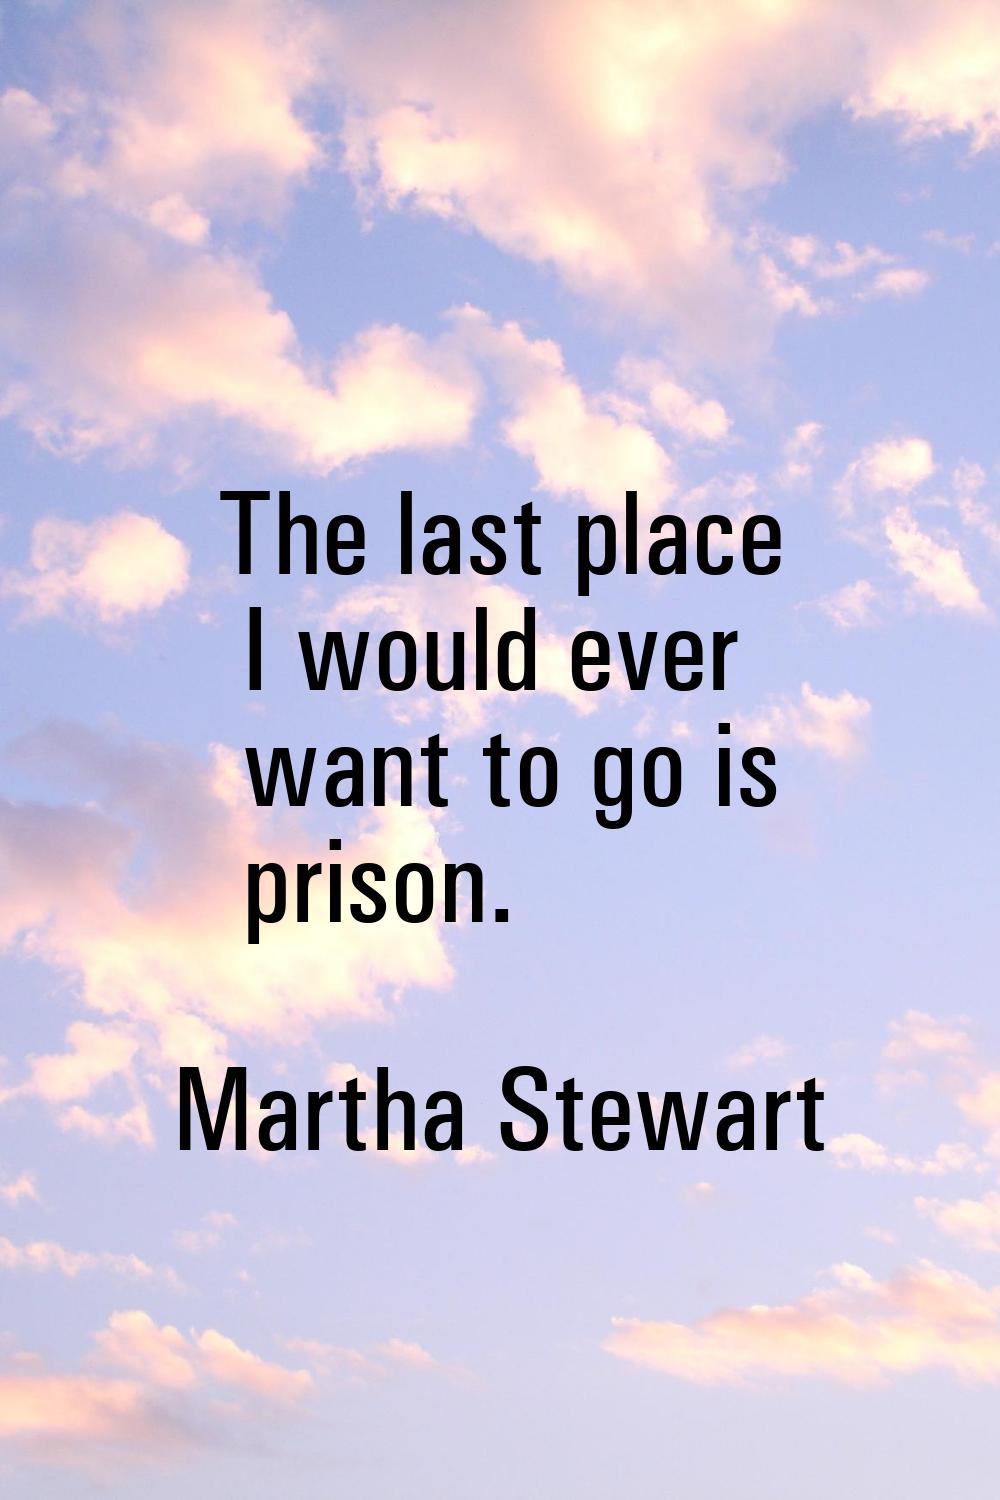 The last place I would ever want to go is prison.